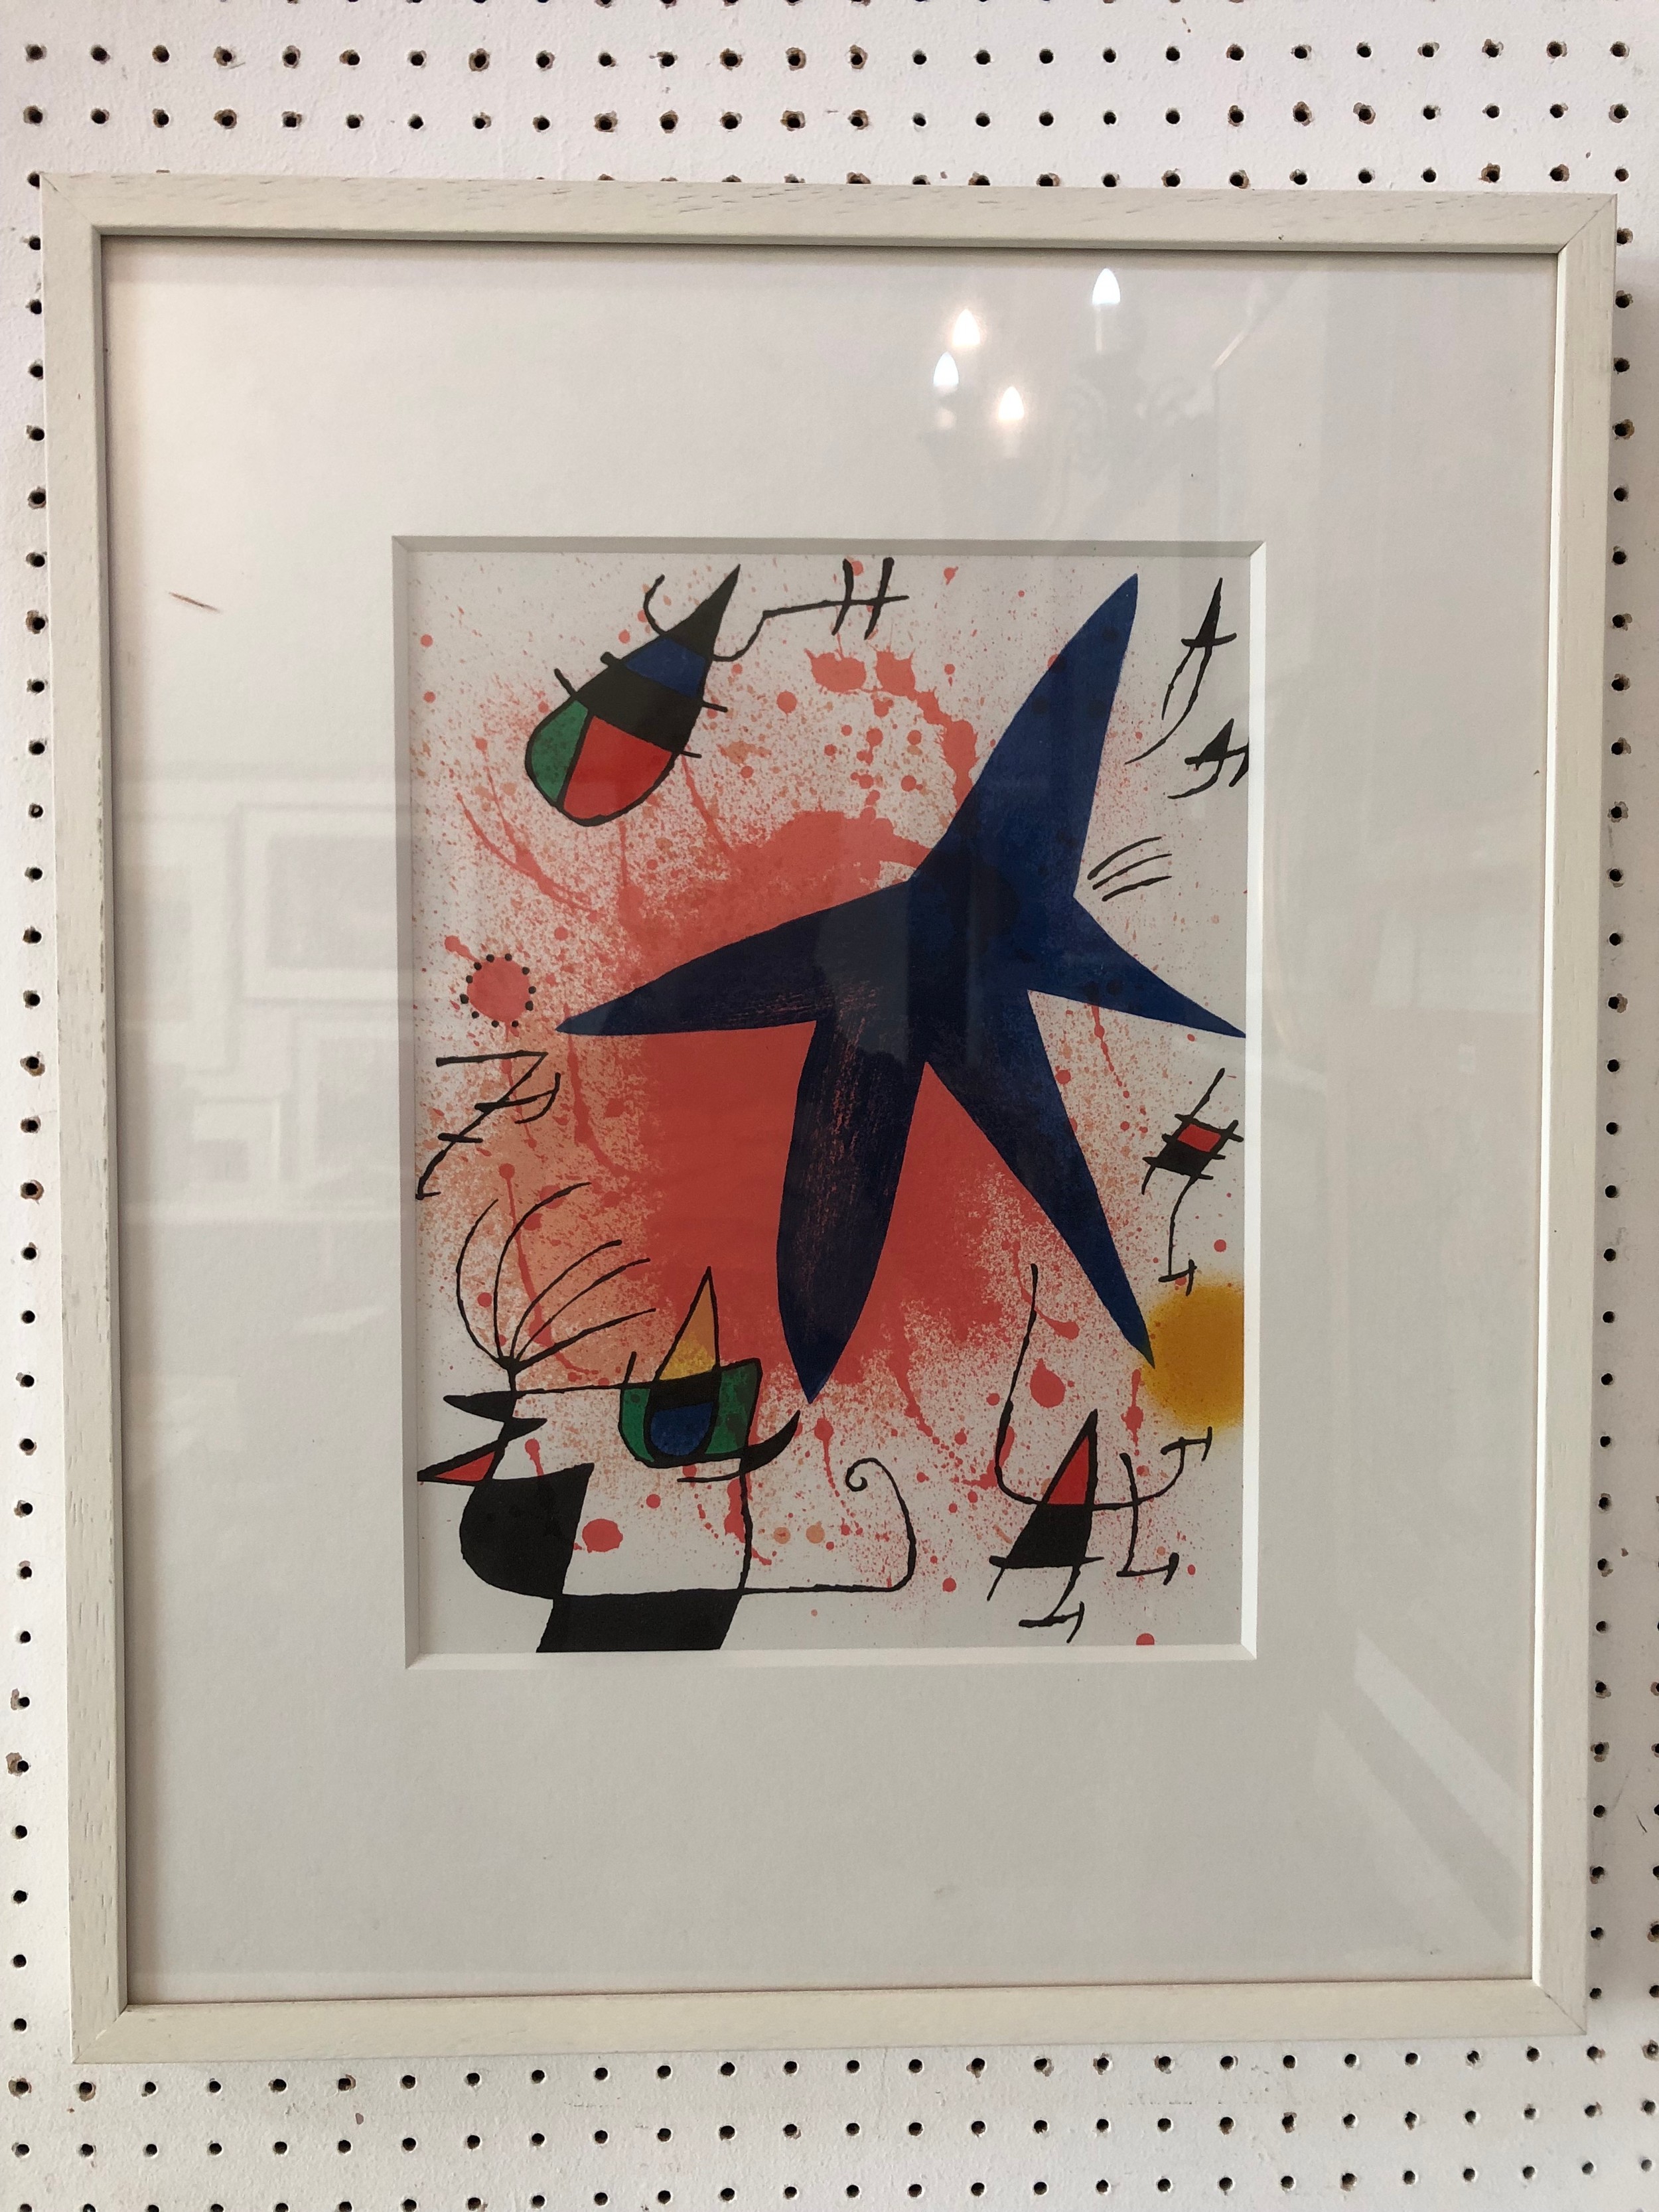 After Joan Miro (1893-1983) - Untitled (1972) (from the Joan Miro Lithographie I Suite), original